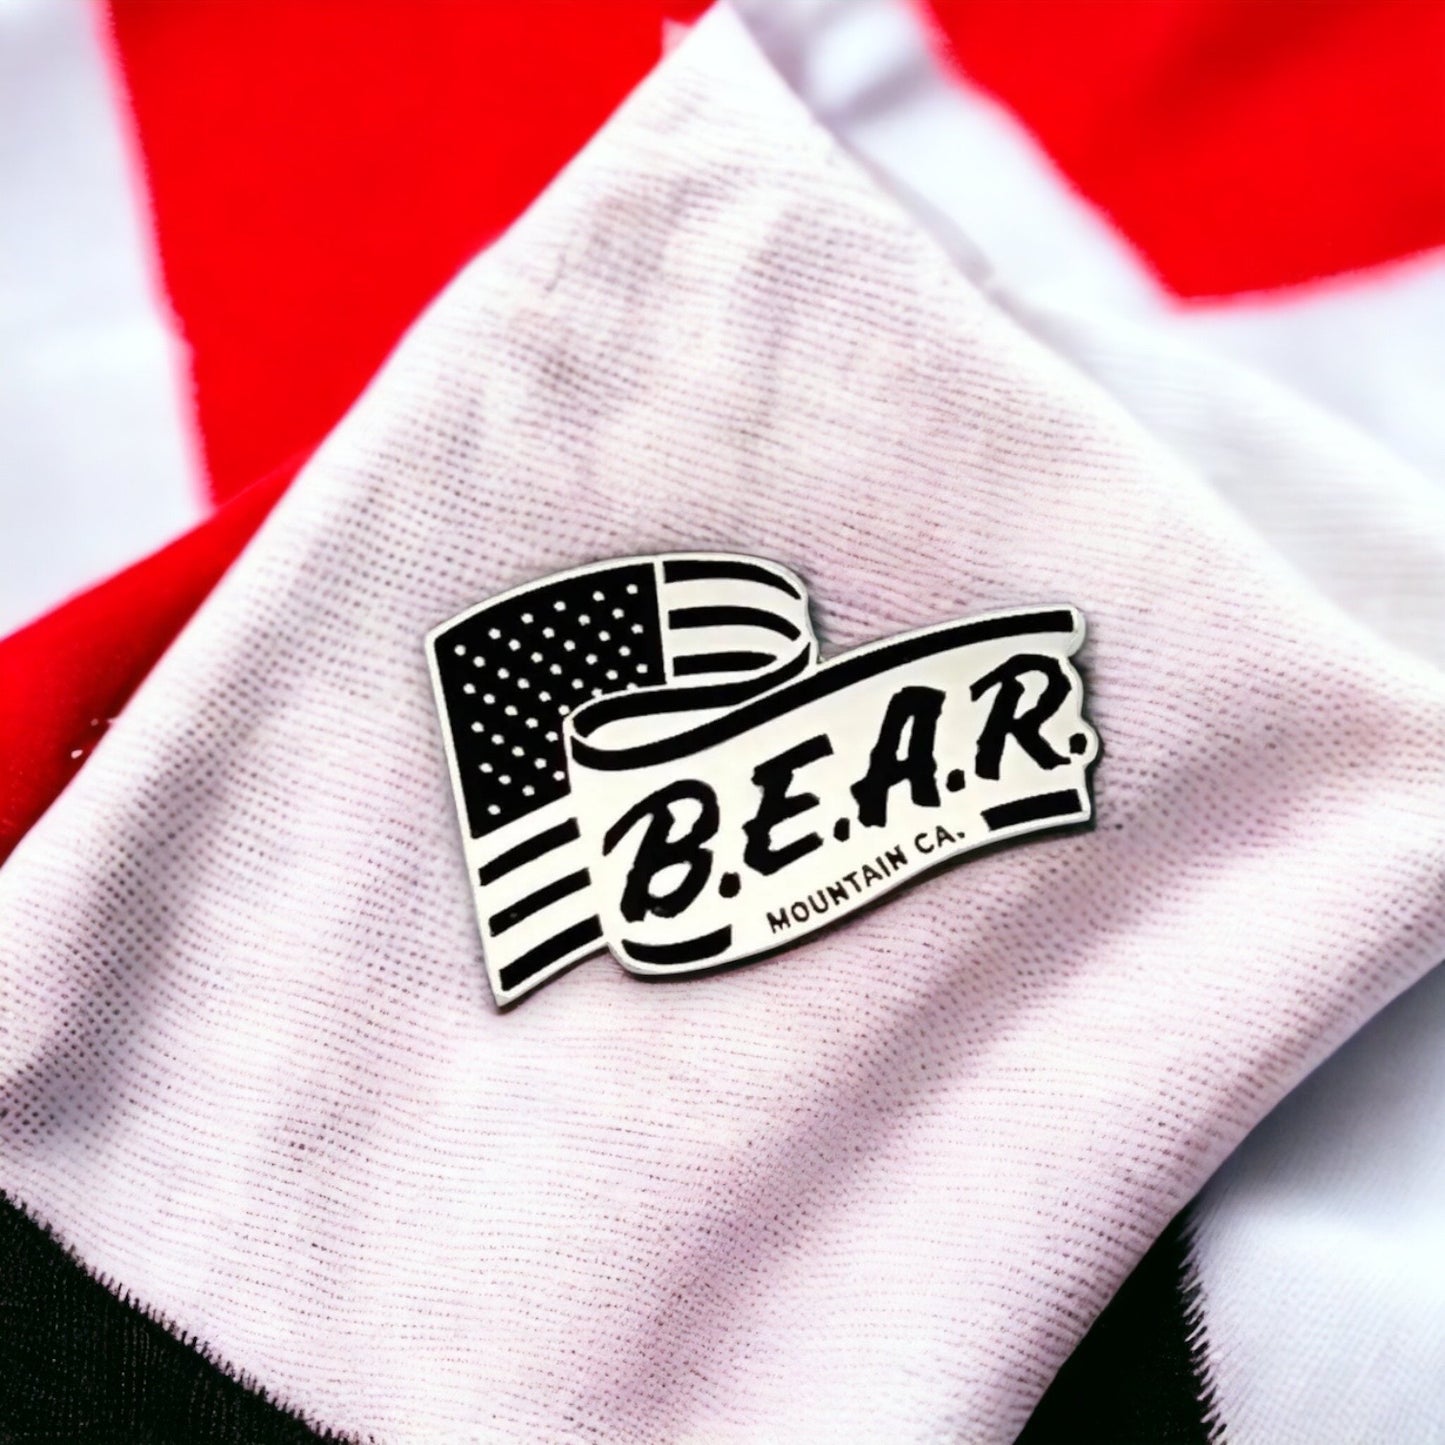 Black and white flag with BEAR on it